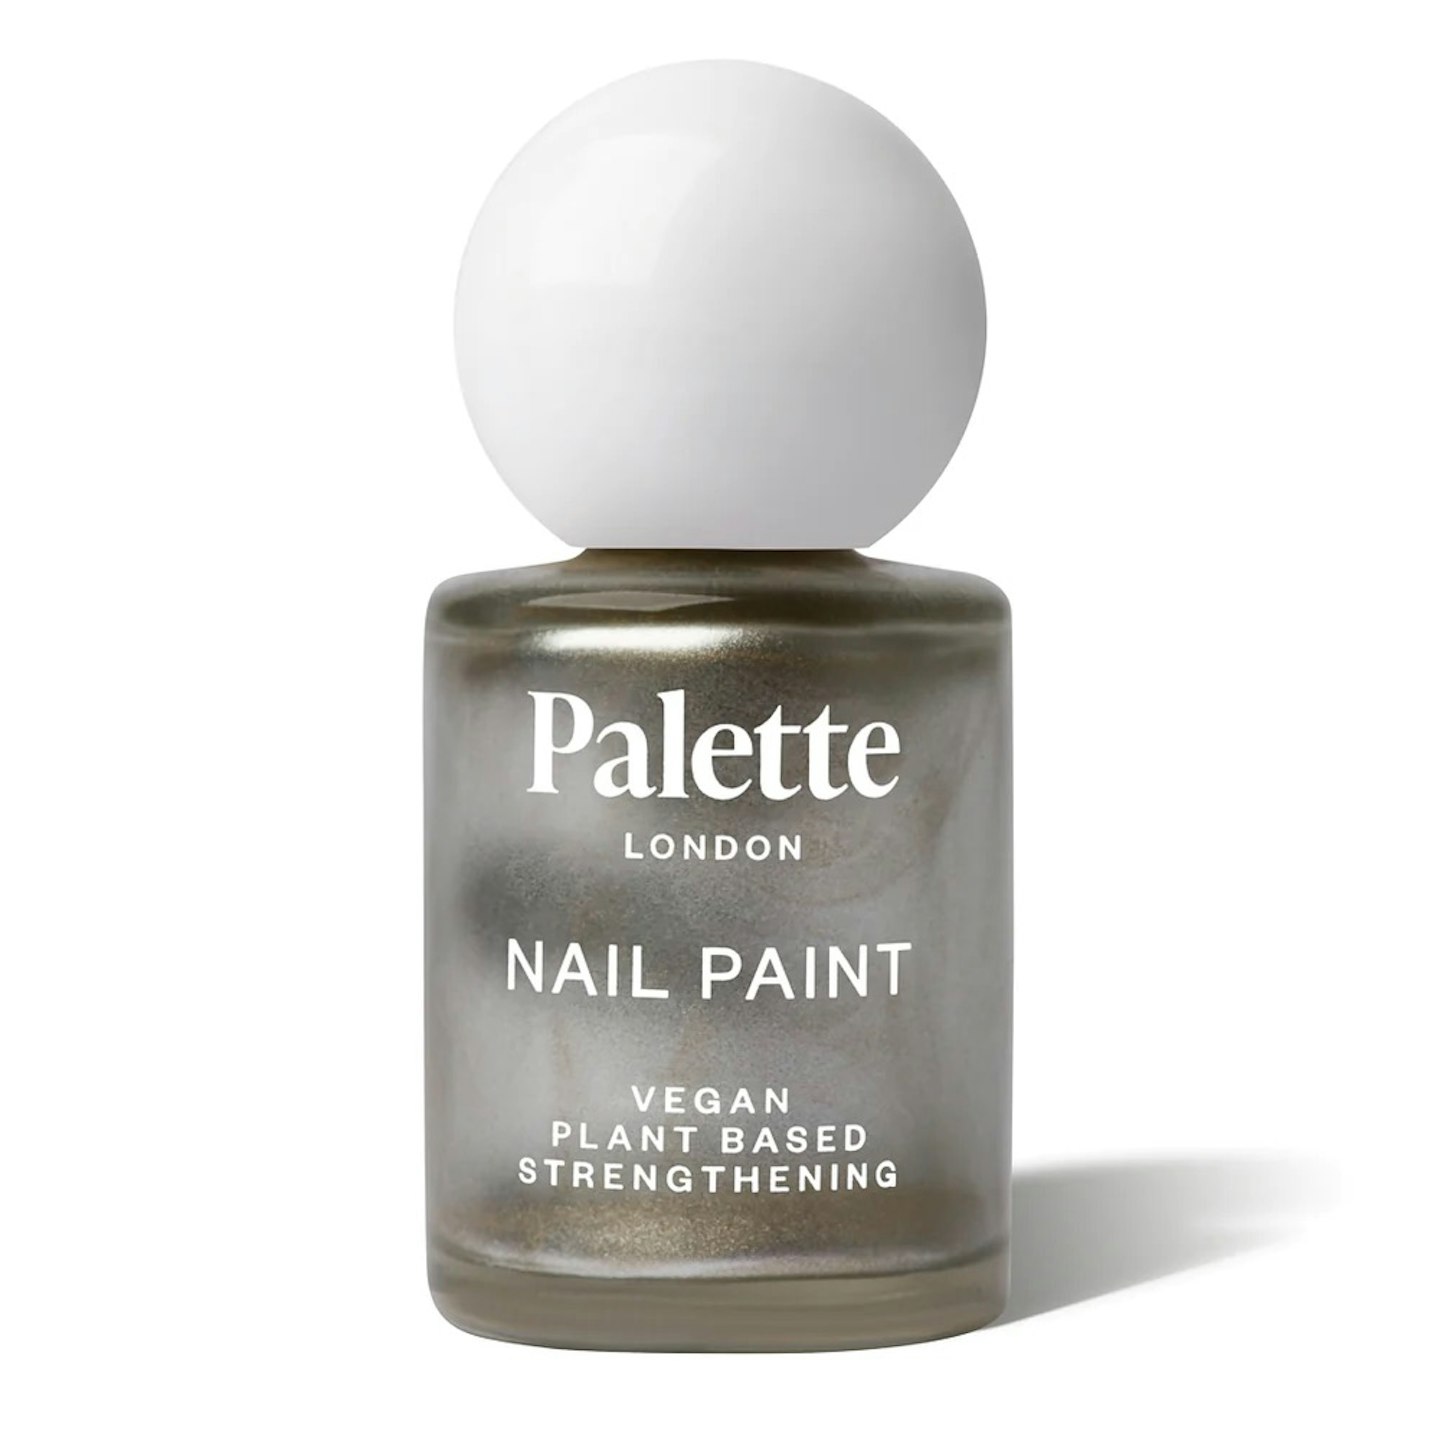 Palette Nail Paint in Antique Gold